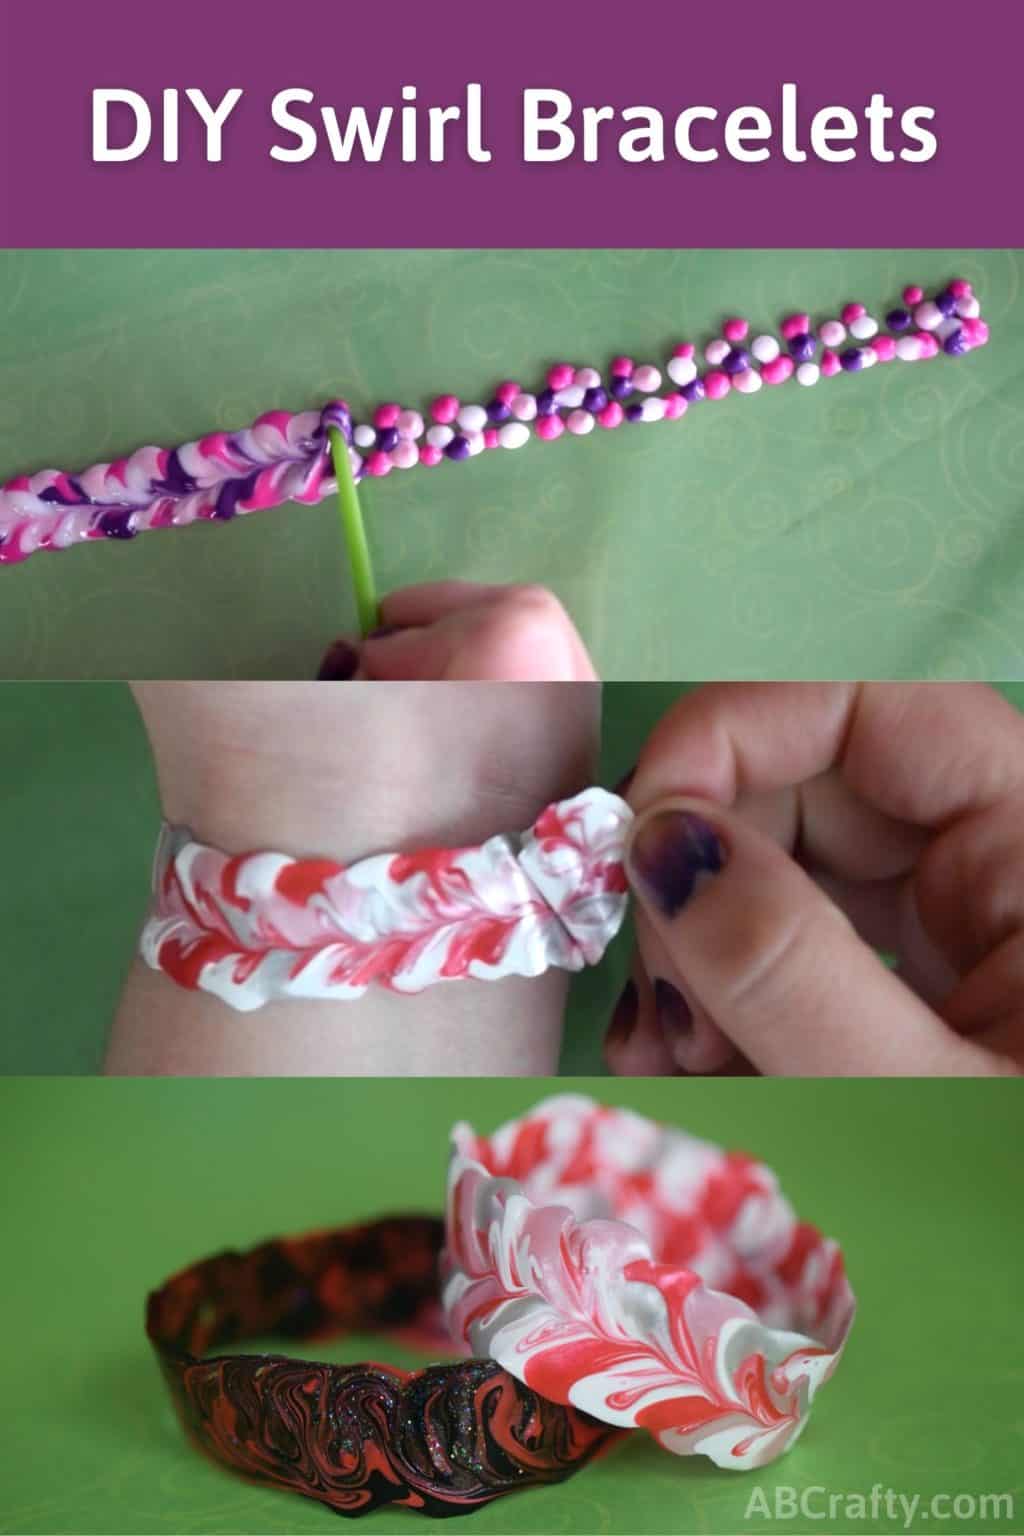 HOW TO MAKE FABRIC BRACELETS | QUICK AND EASY DIY KIDS PROJECT - YouTube